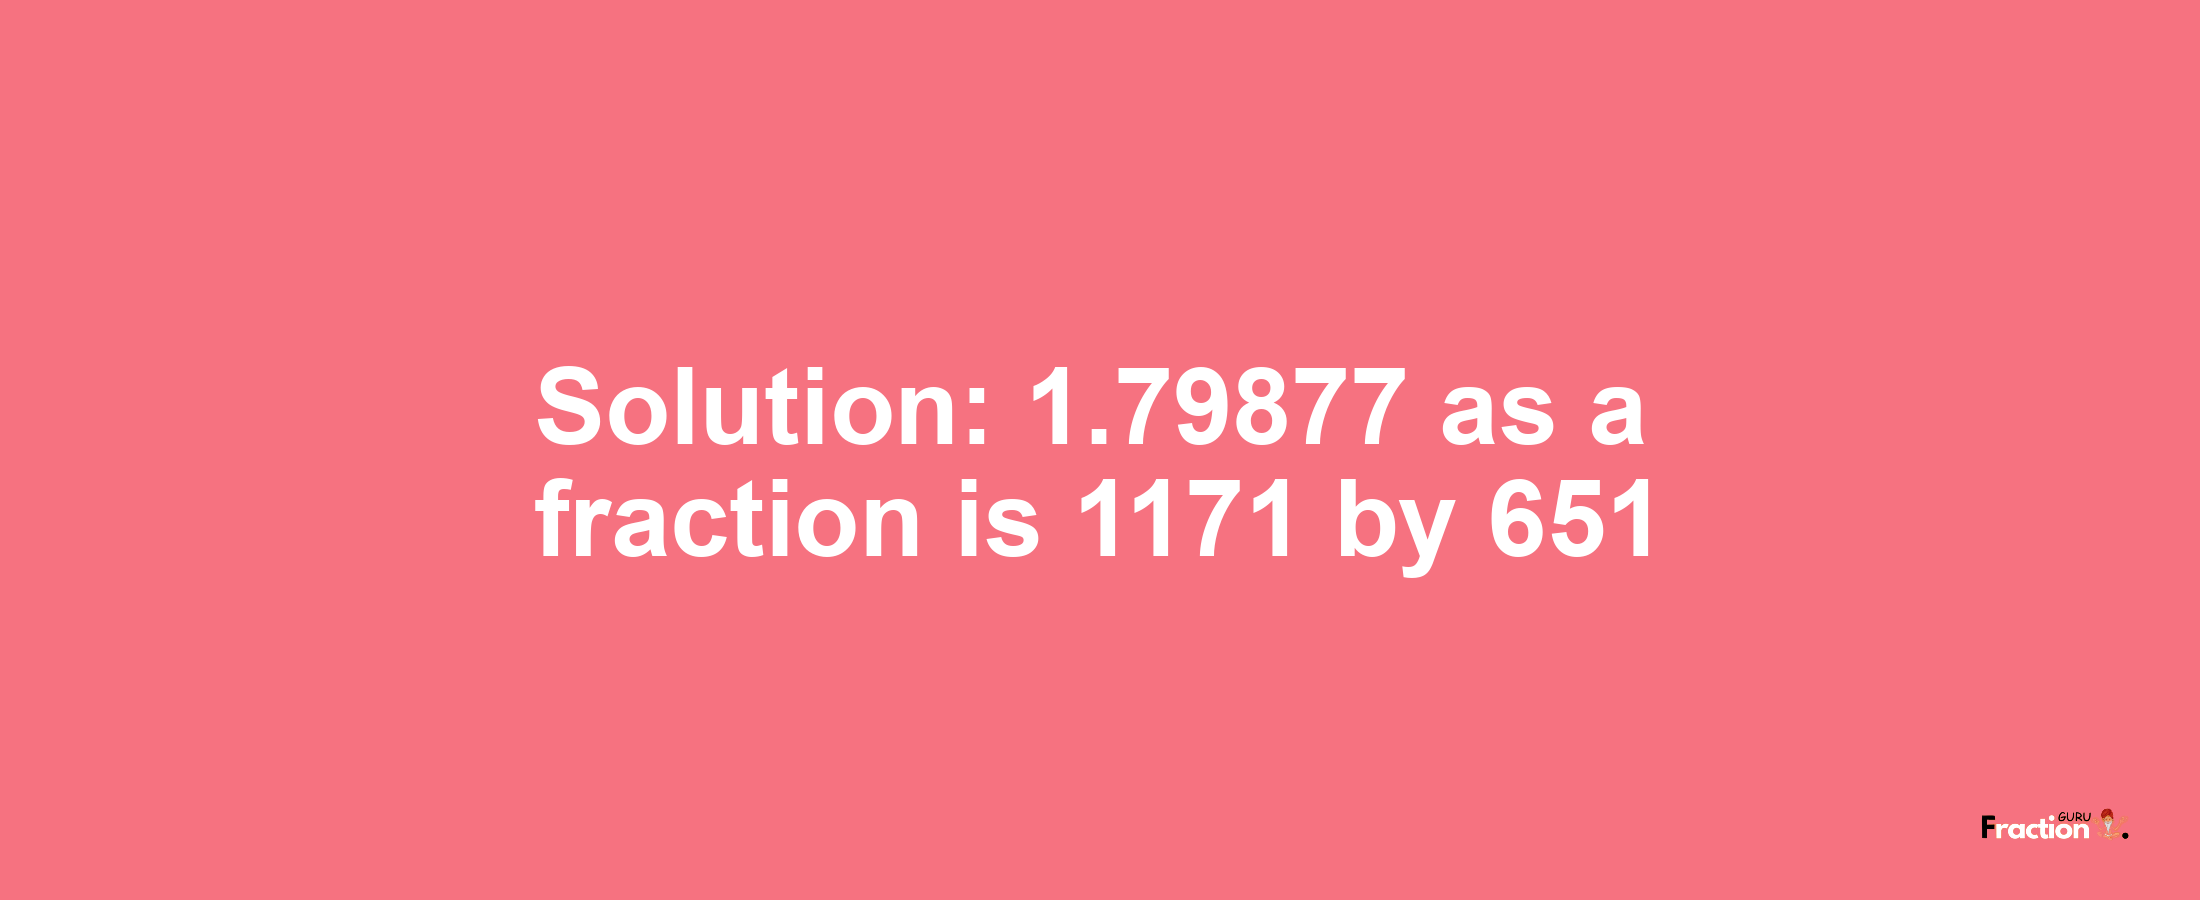 Solution:1.79877 as a fraction is 1171/651